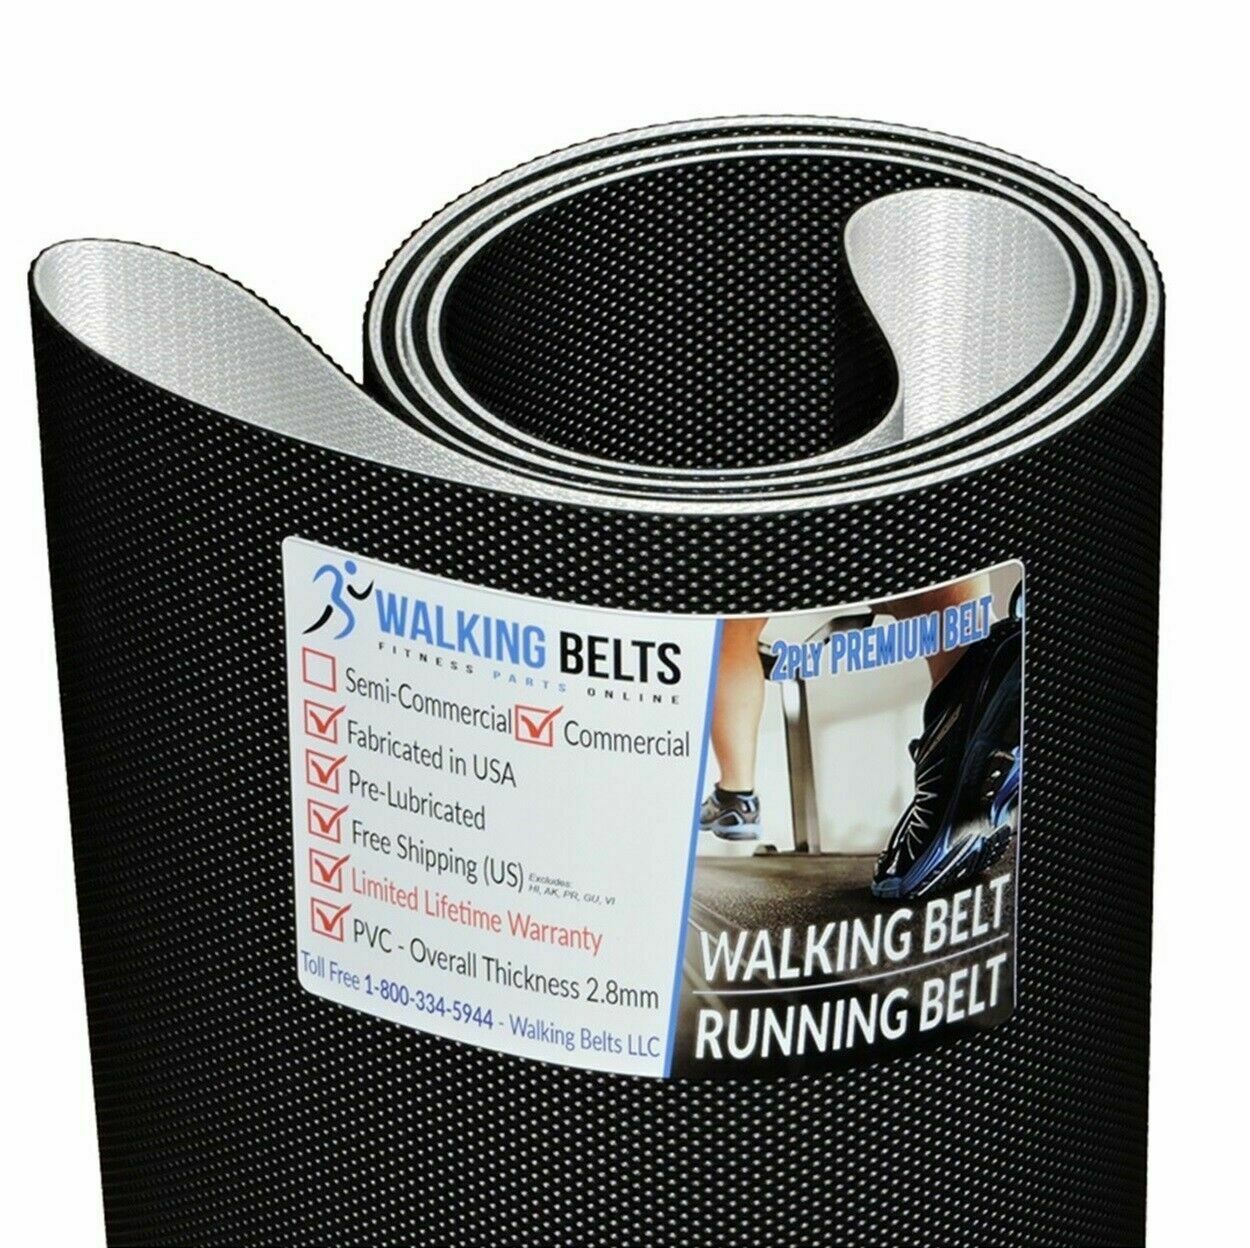 GB BELTING LIMITED Livestrong LS15.0T-C1 2 Ply Lubricated Treadmill Belt 